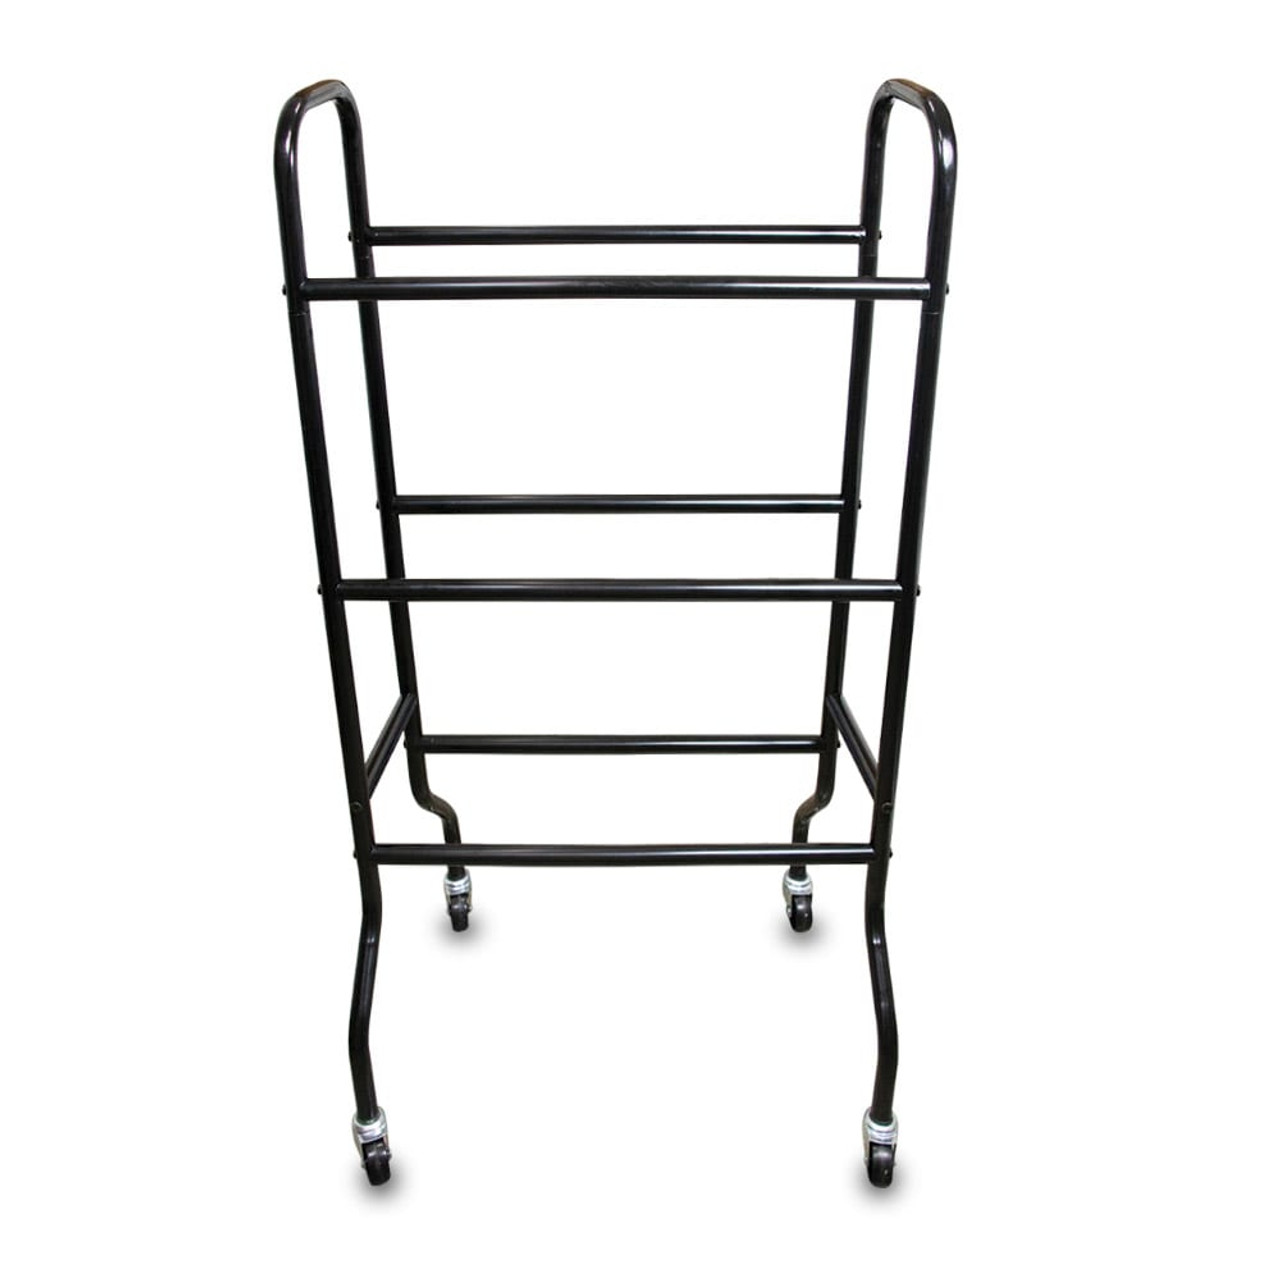 Spalding Basketball Sporting Rack Cart - Holds up to 6 Balls